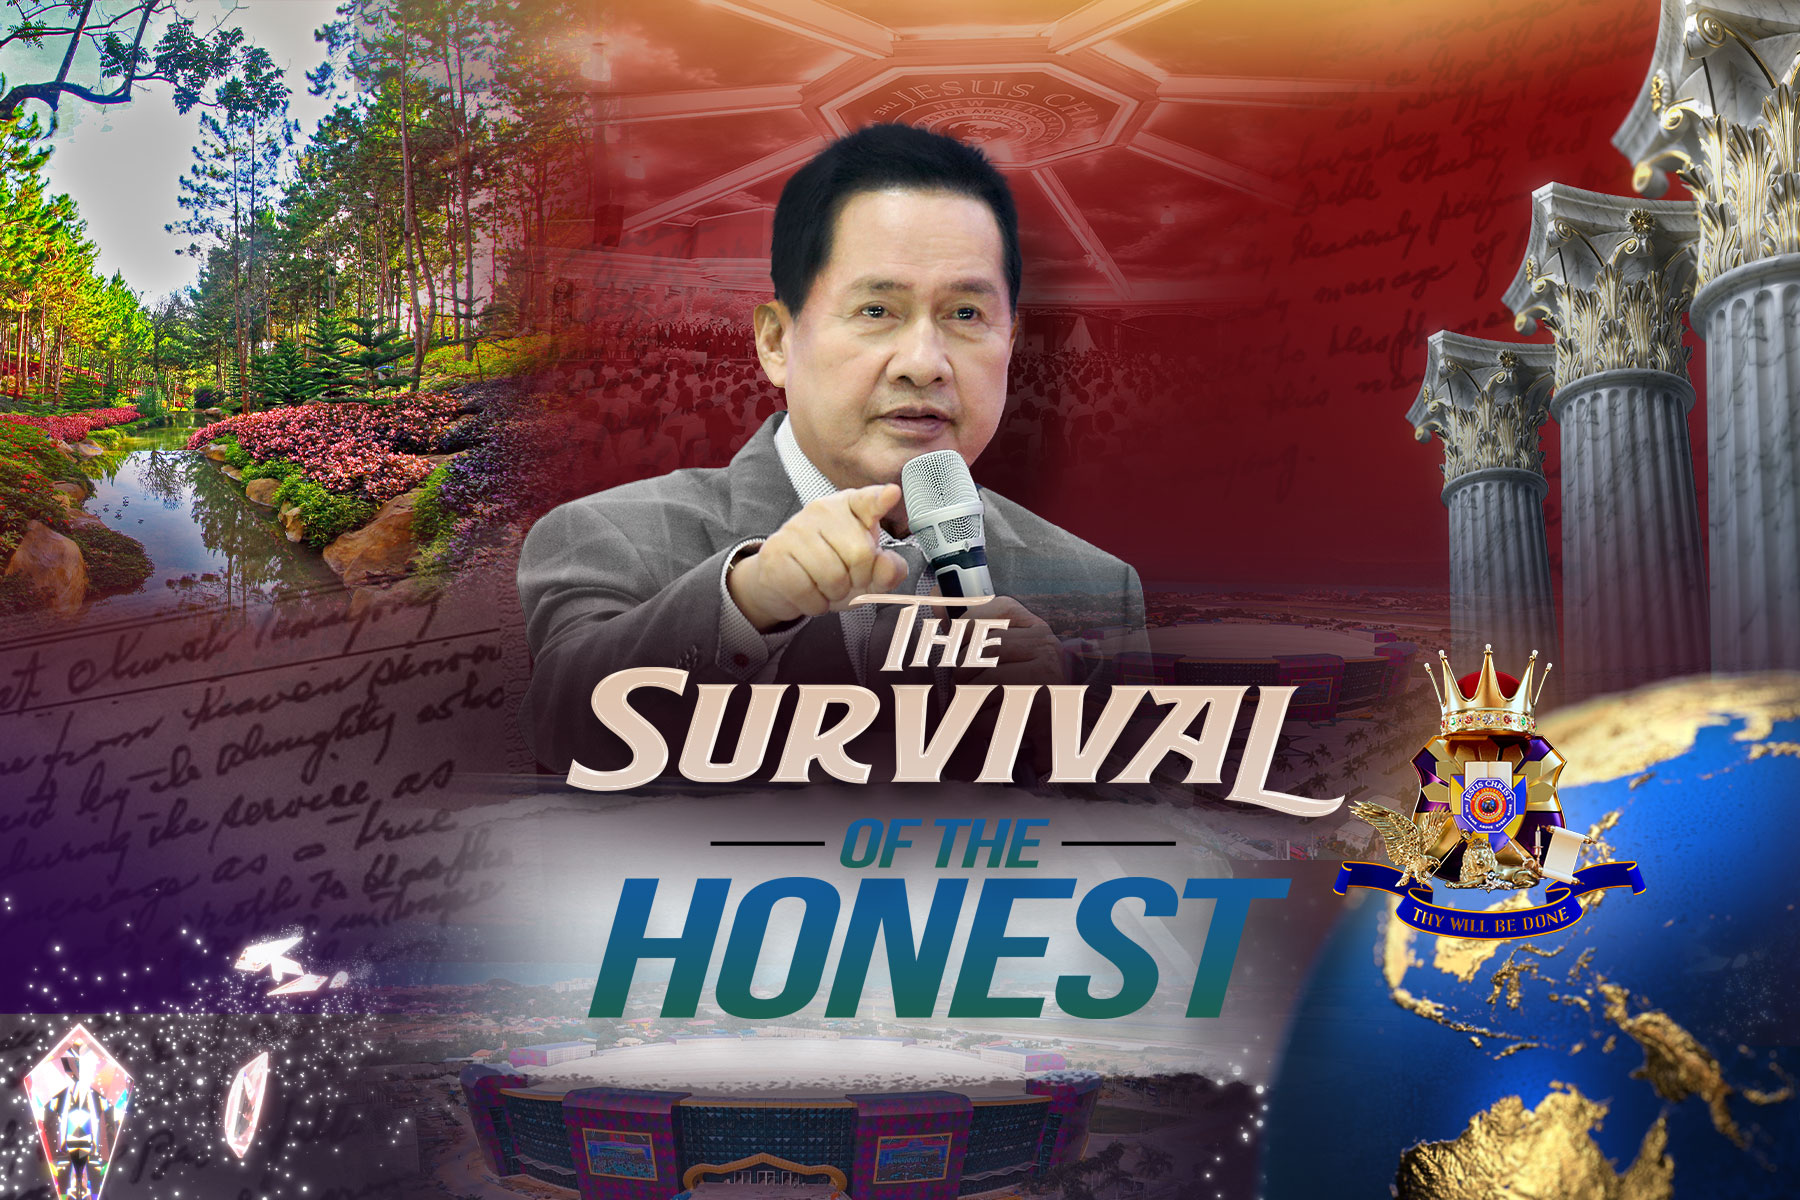 THE SURVIVAL OF THE HONEST